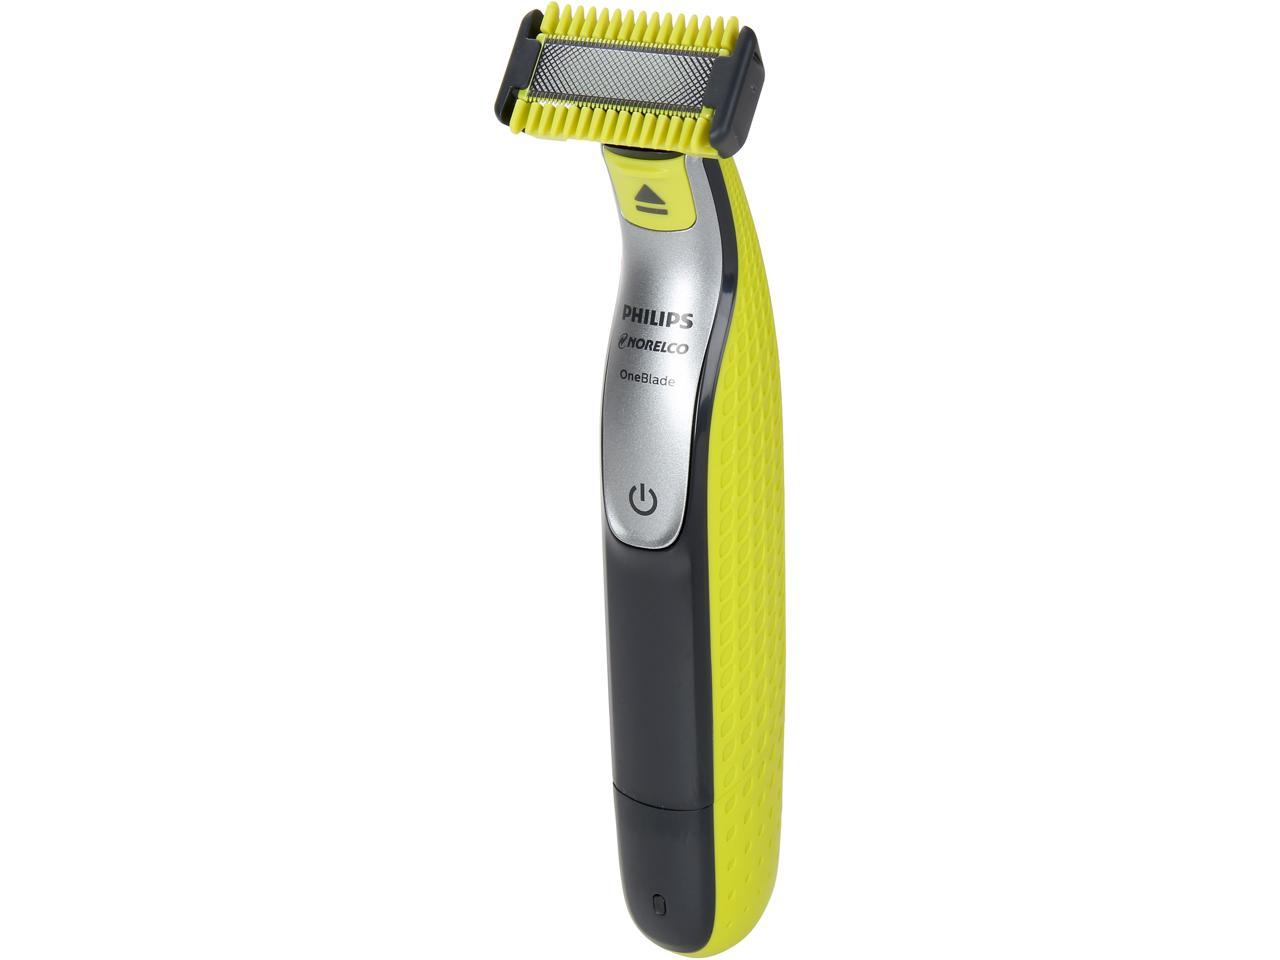 one blade hair trimmer